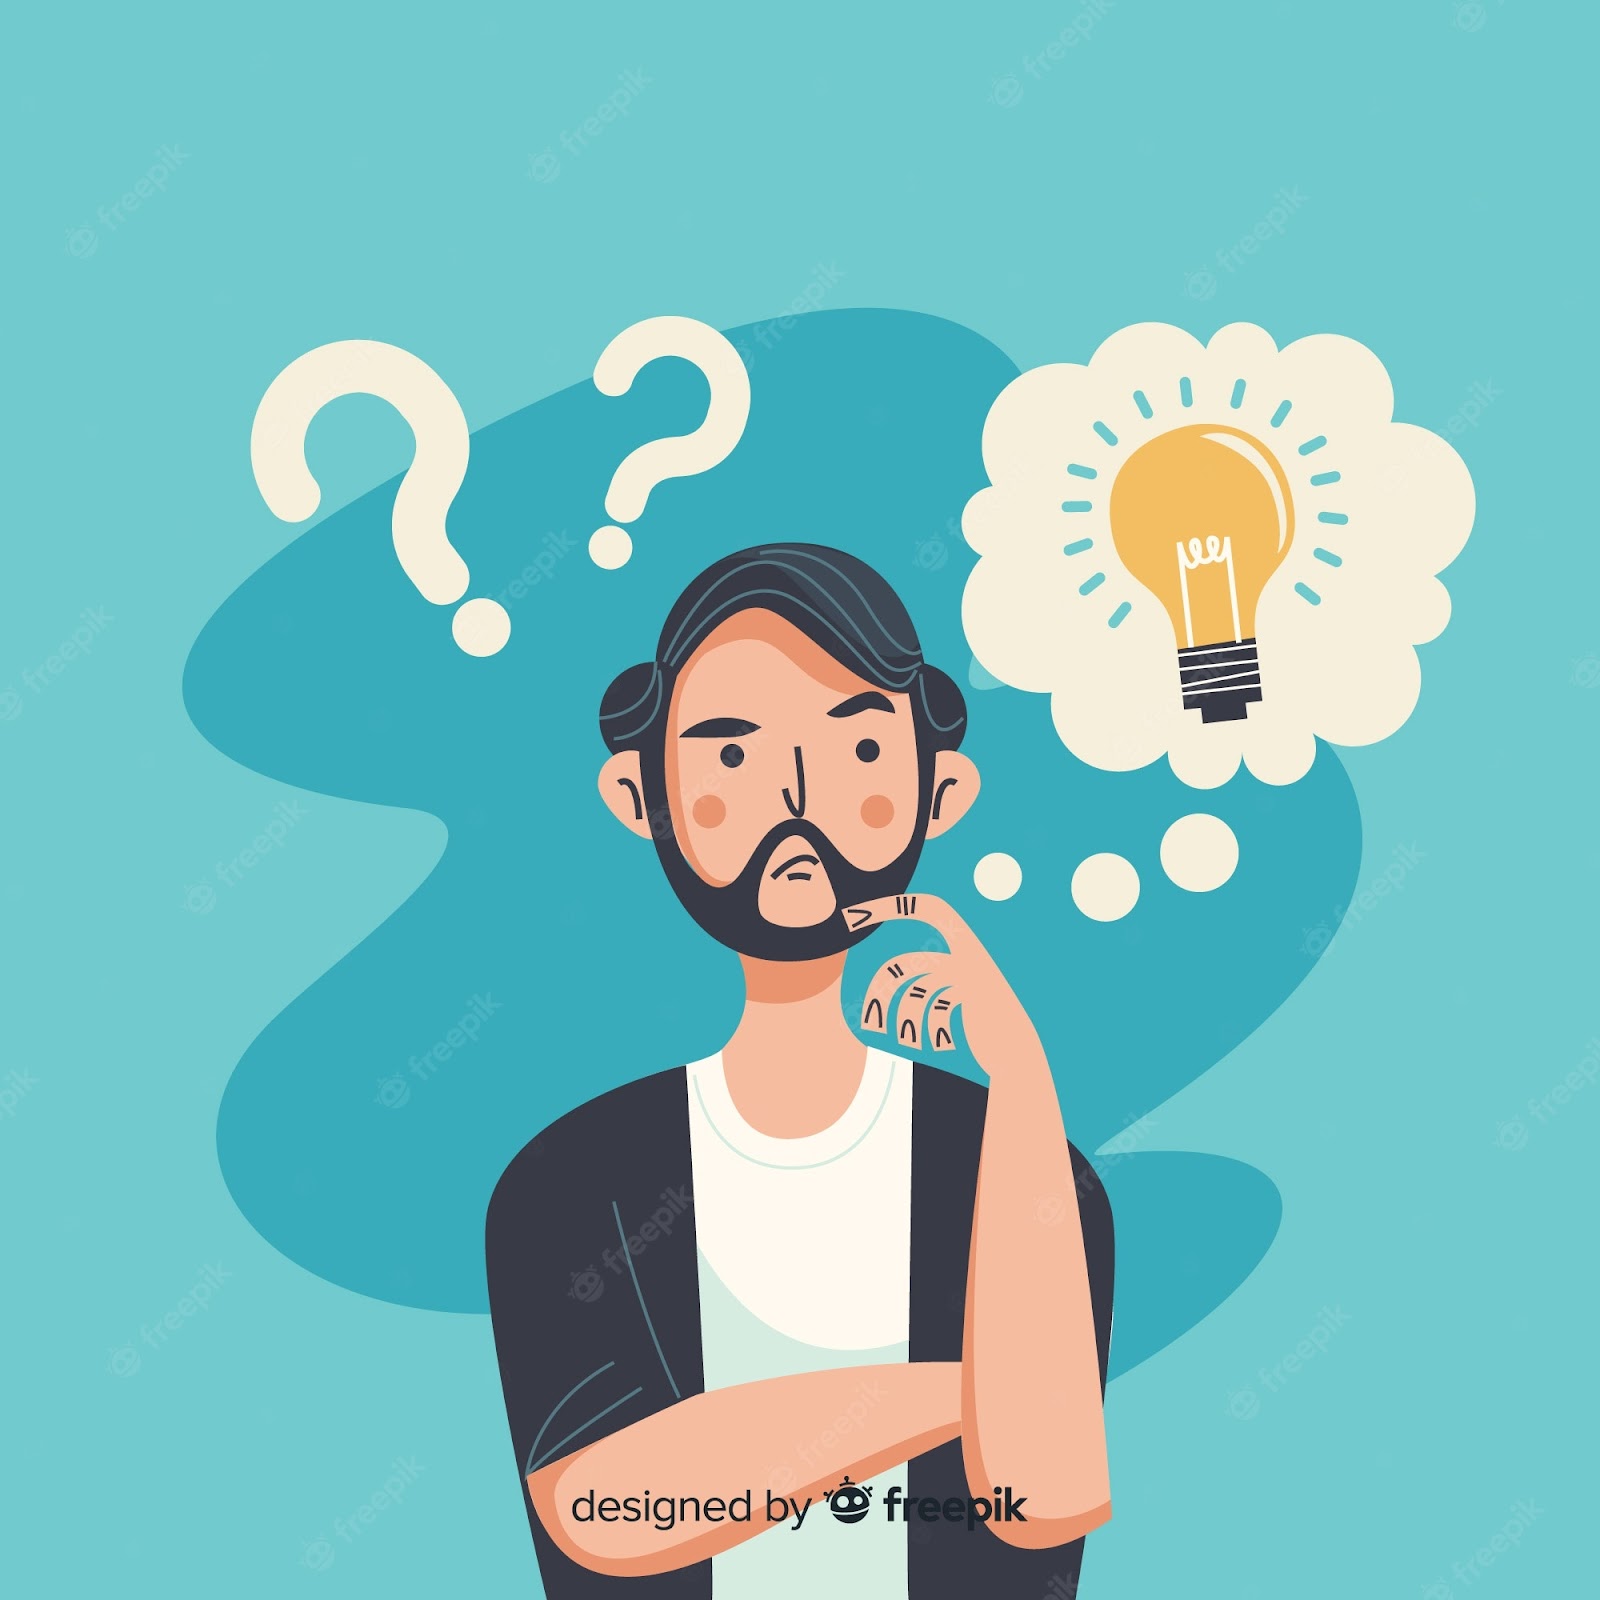 Systems thinking Images | Free Vectors, Stock Photos & PSD